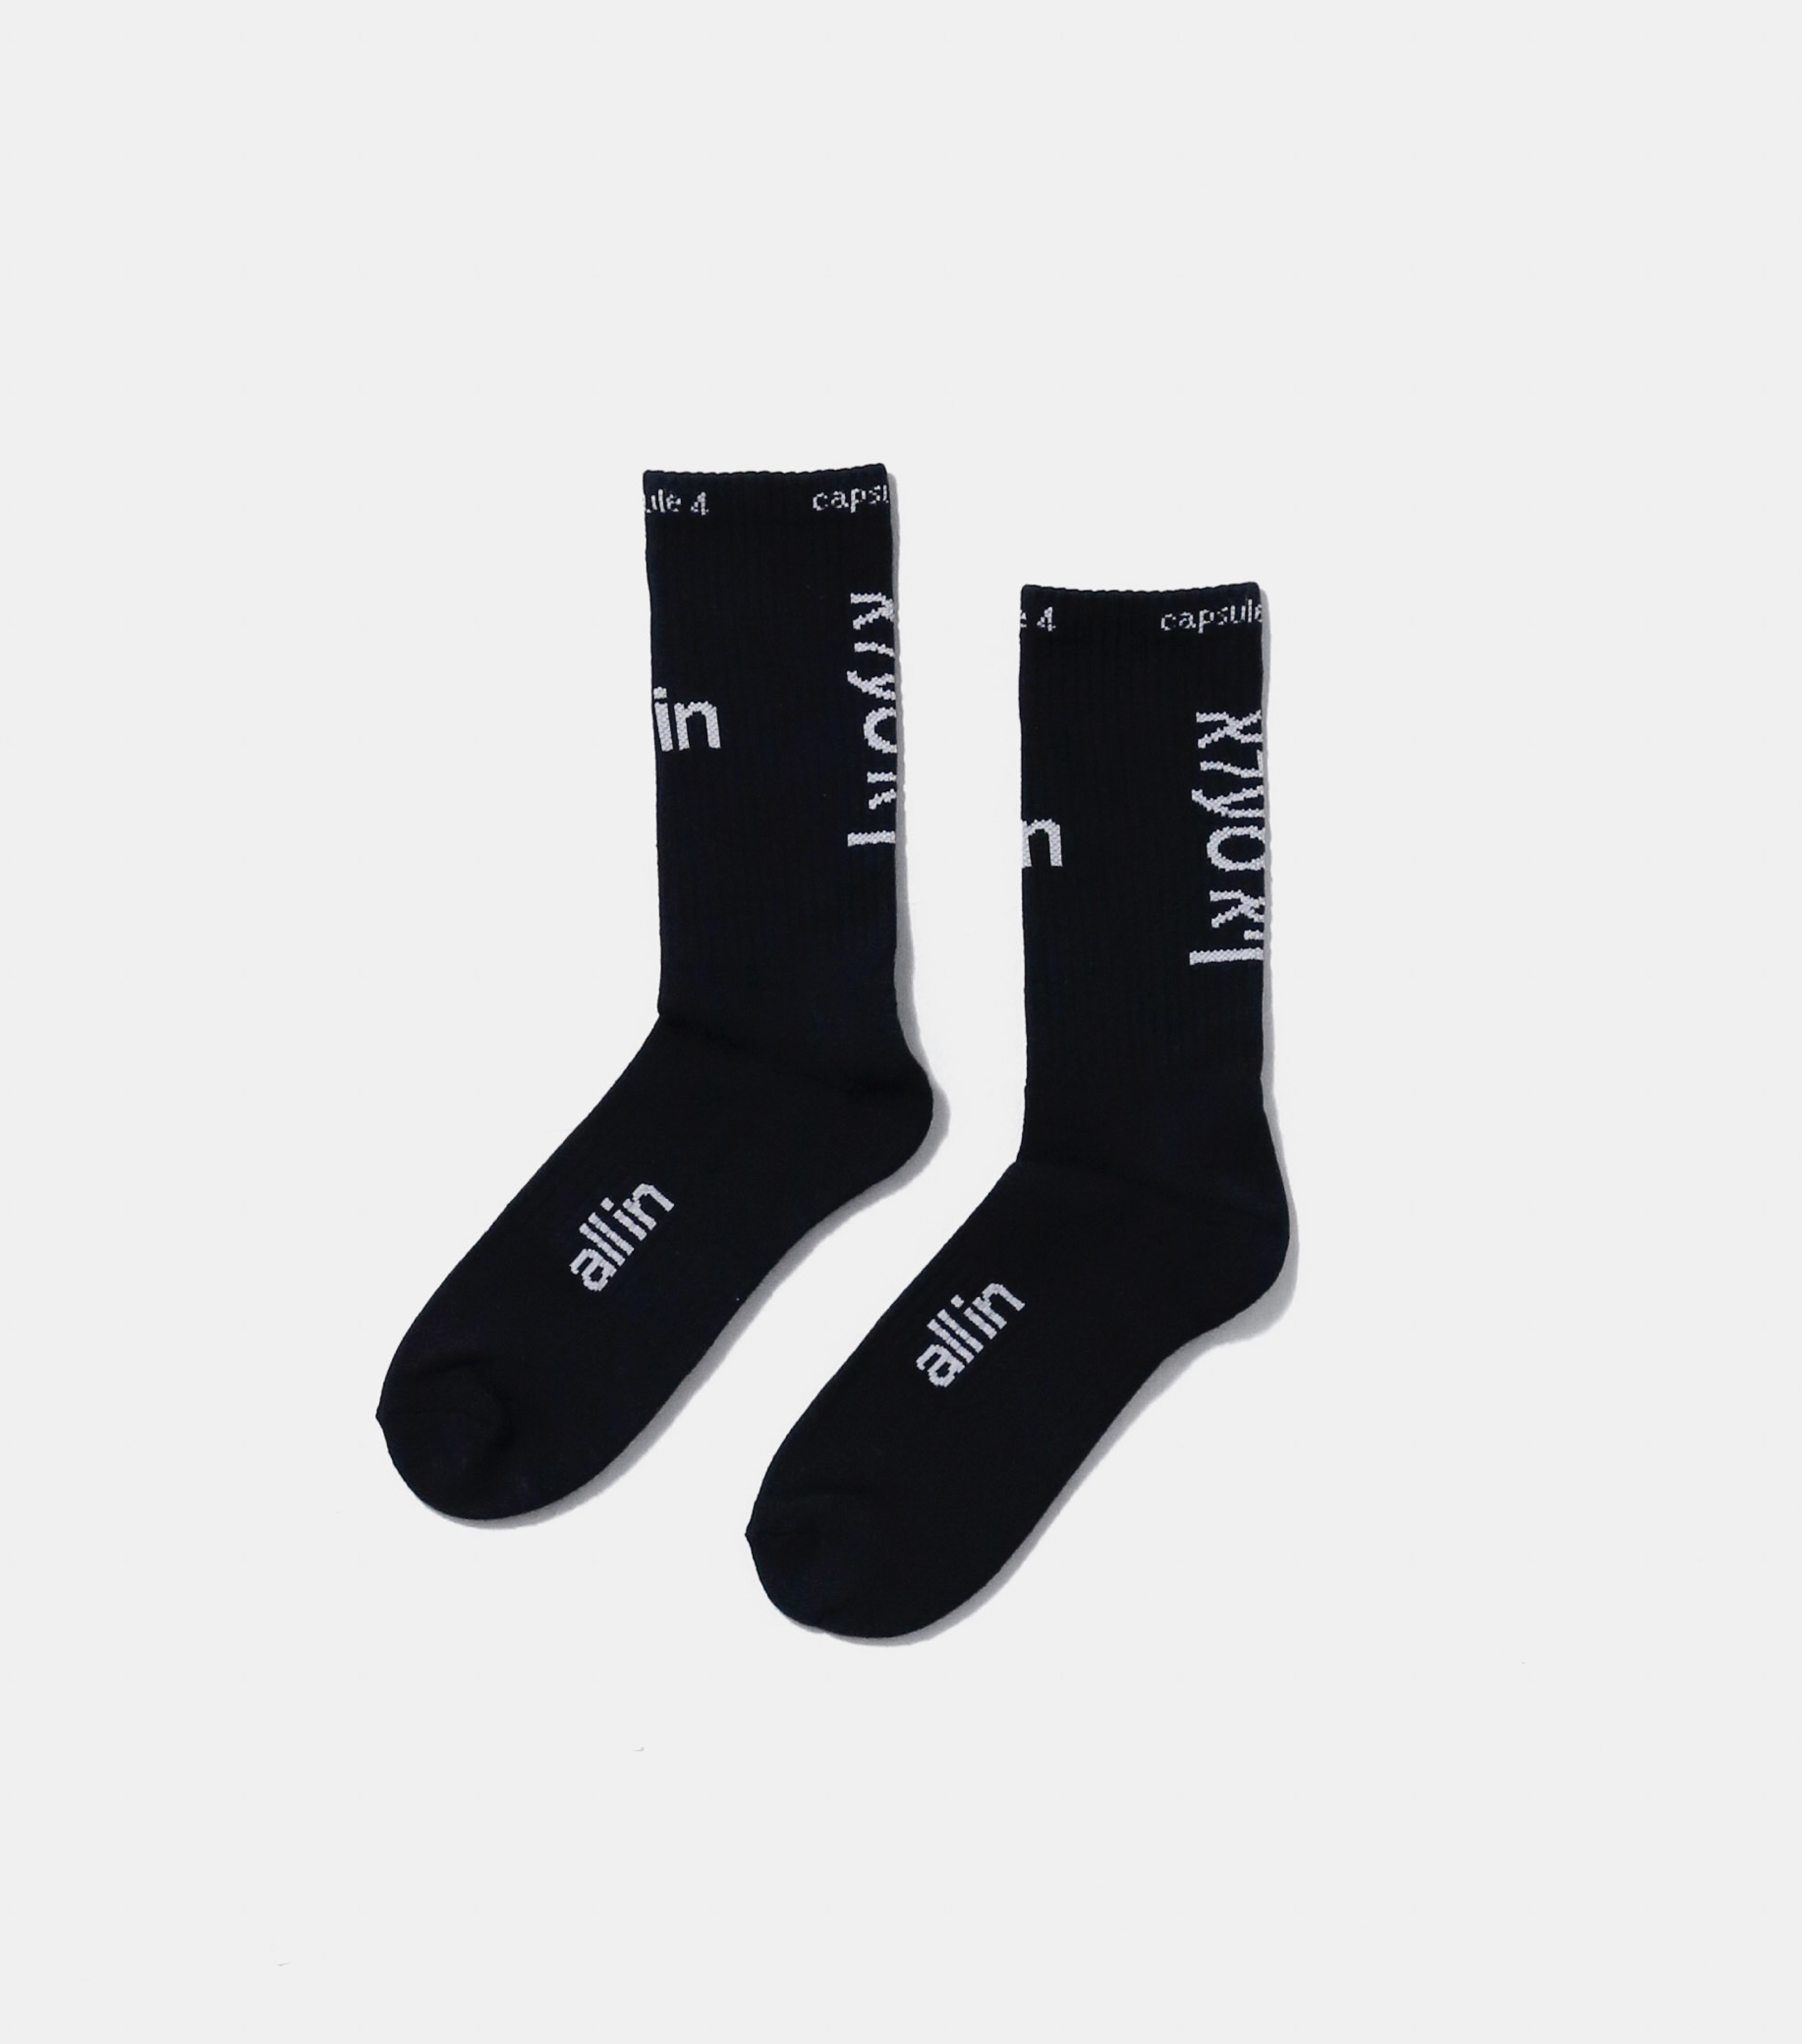 Socks – Product Photo Services